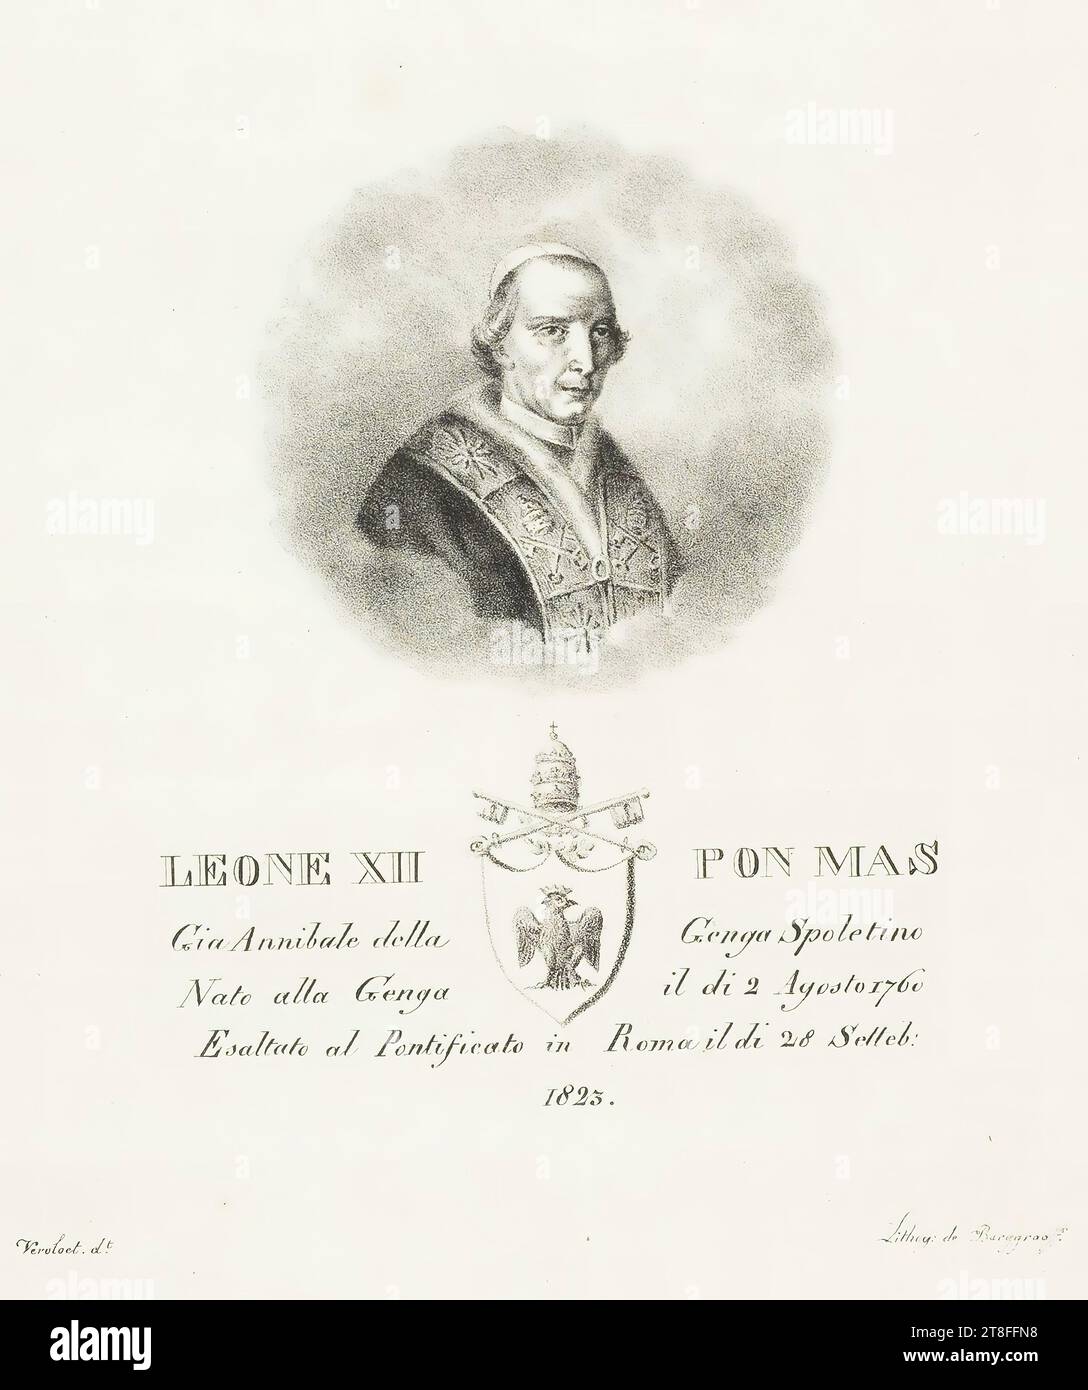 LEO XII PON MAS, Gia Annibale della Genga Spoletino, Born in Genga on 2 August 1760, Exalted to the Pontificate in Rome on 28 September, 1823. Vervloet. dt. Lithog: de Burggraaff Stock Photo